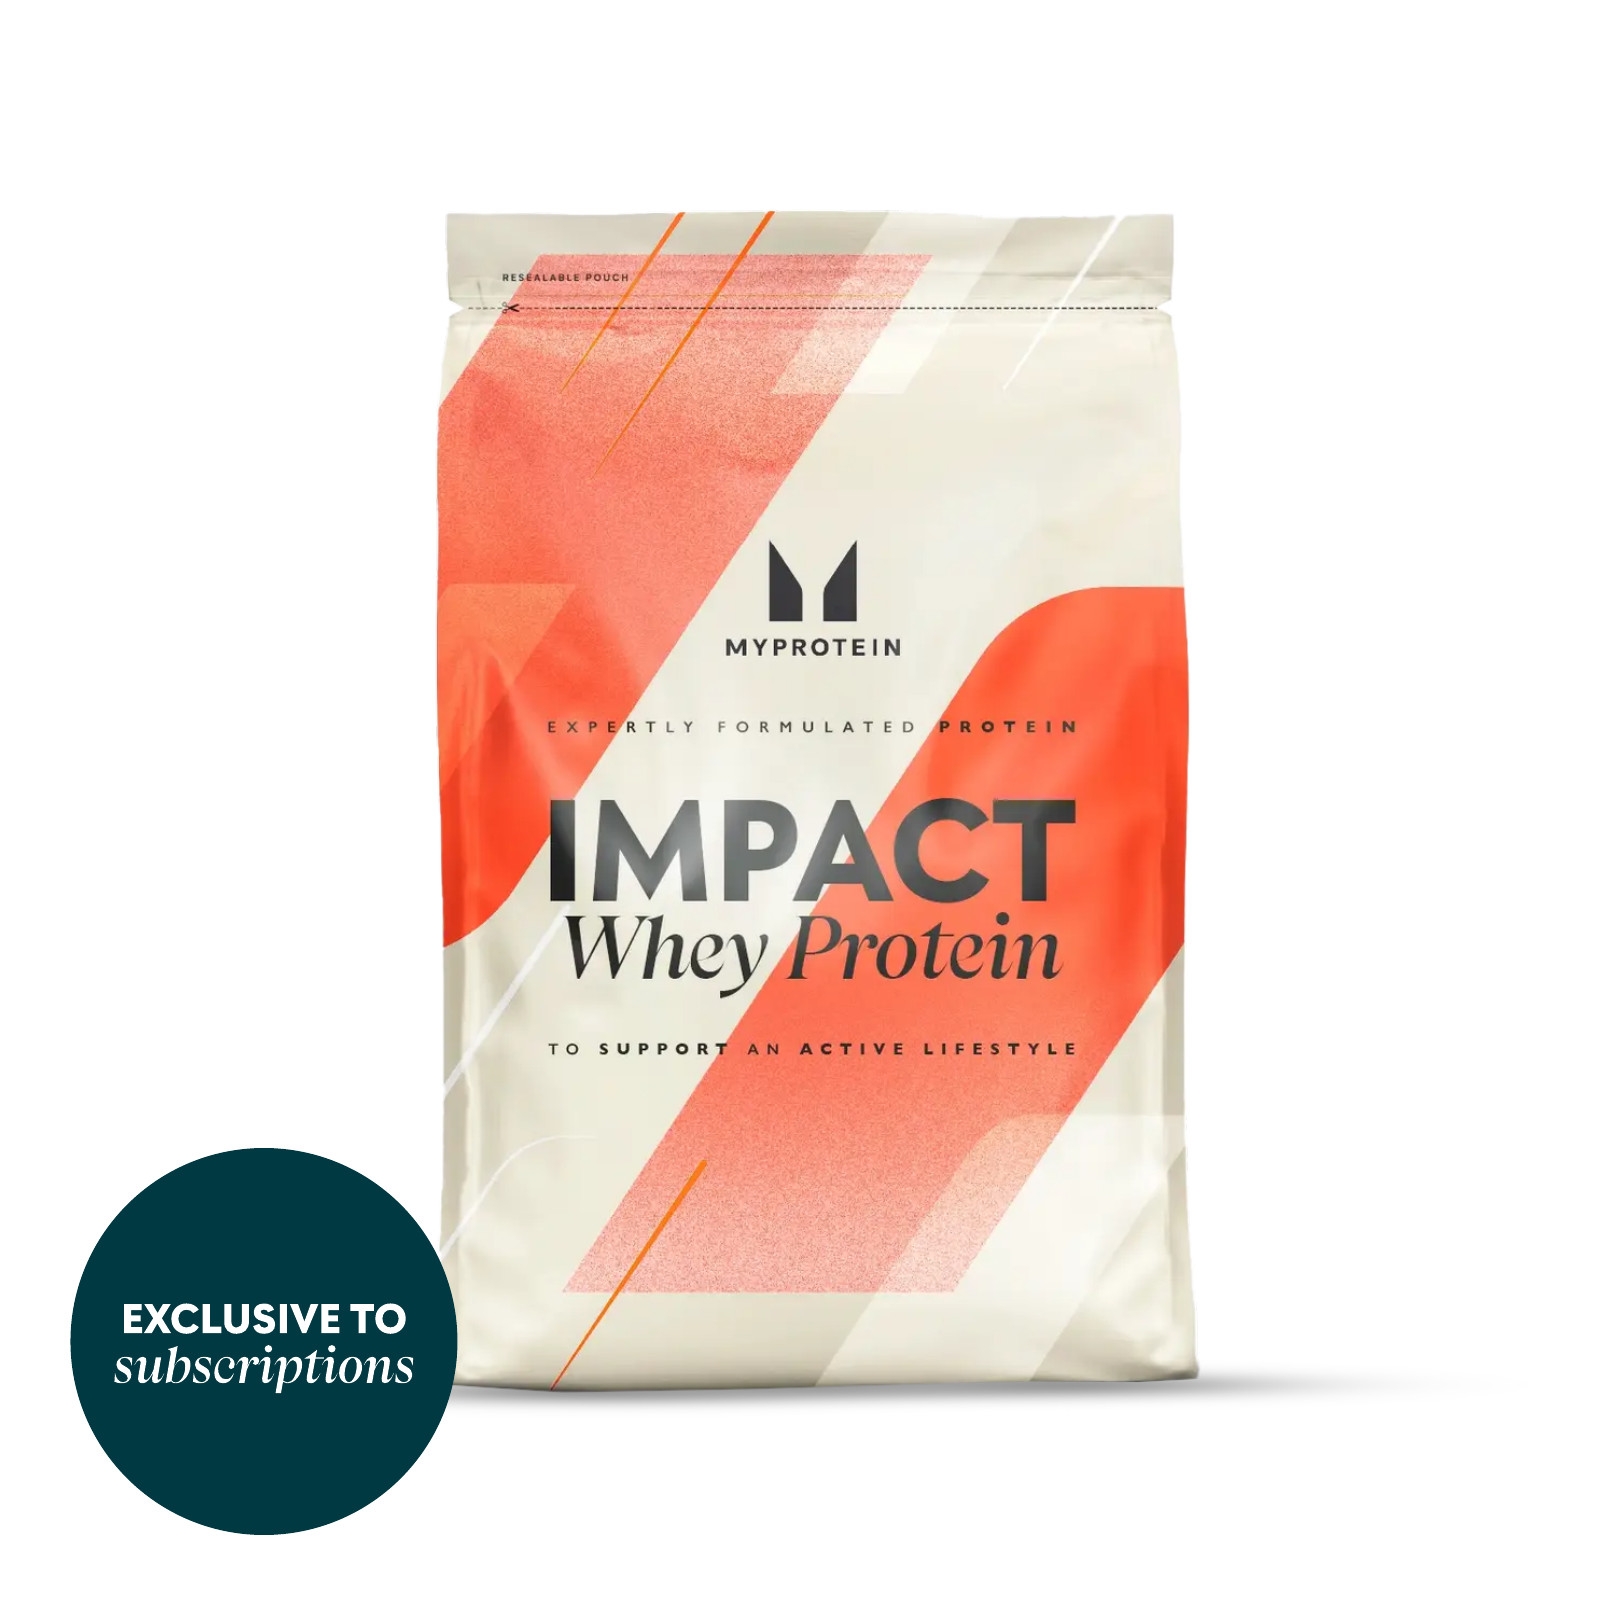 Impact Whey Protein (500g) Subscription Exclusive - 16servings - Chocolate Smooth